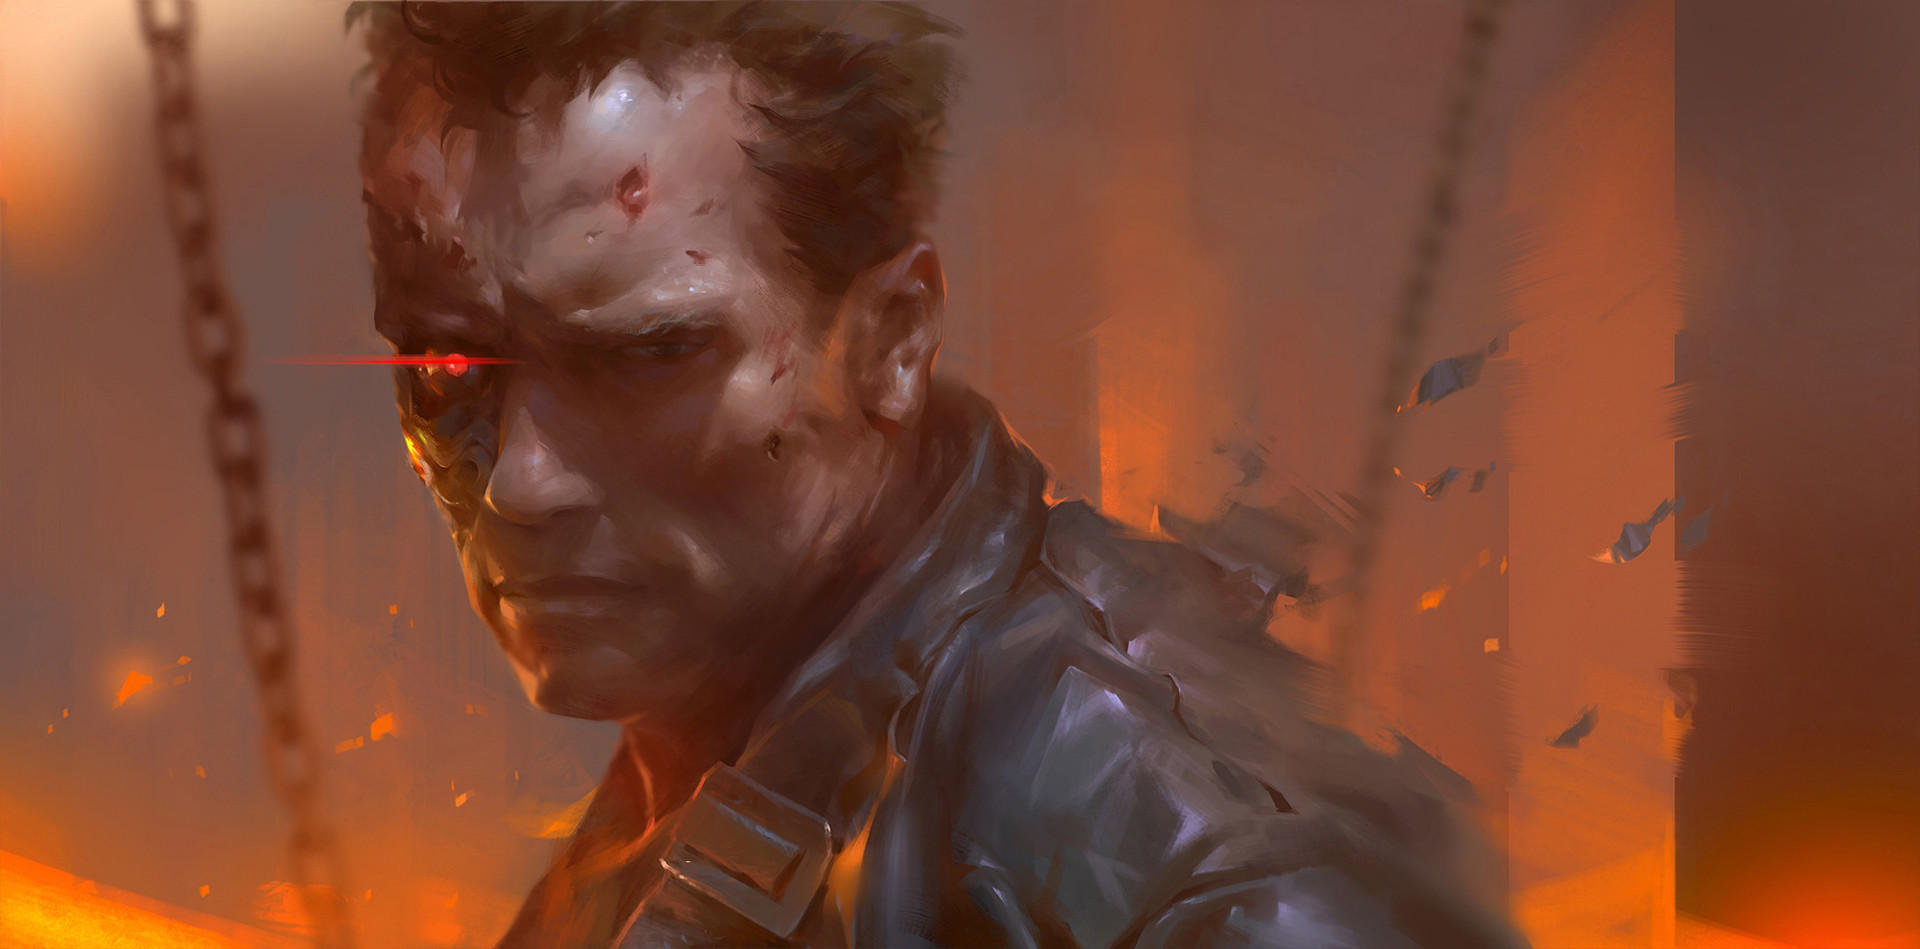 General 1920x949 Terminator 2 T-800 cyborg Arnold Schwarzenegger chains fire drawing science fiction movies men machine red eyes